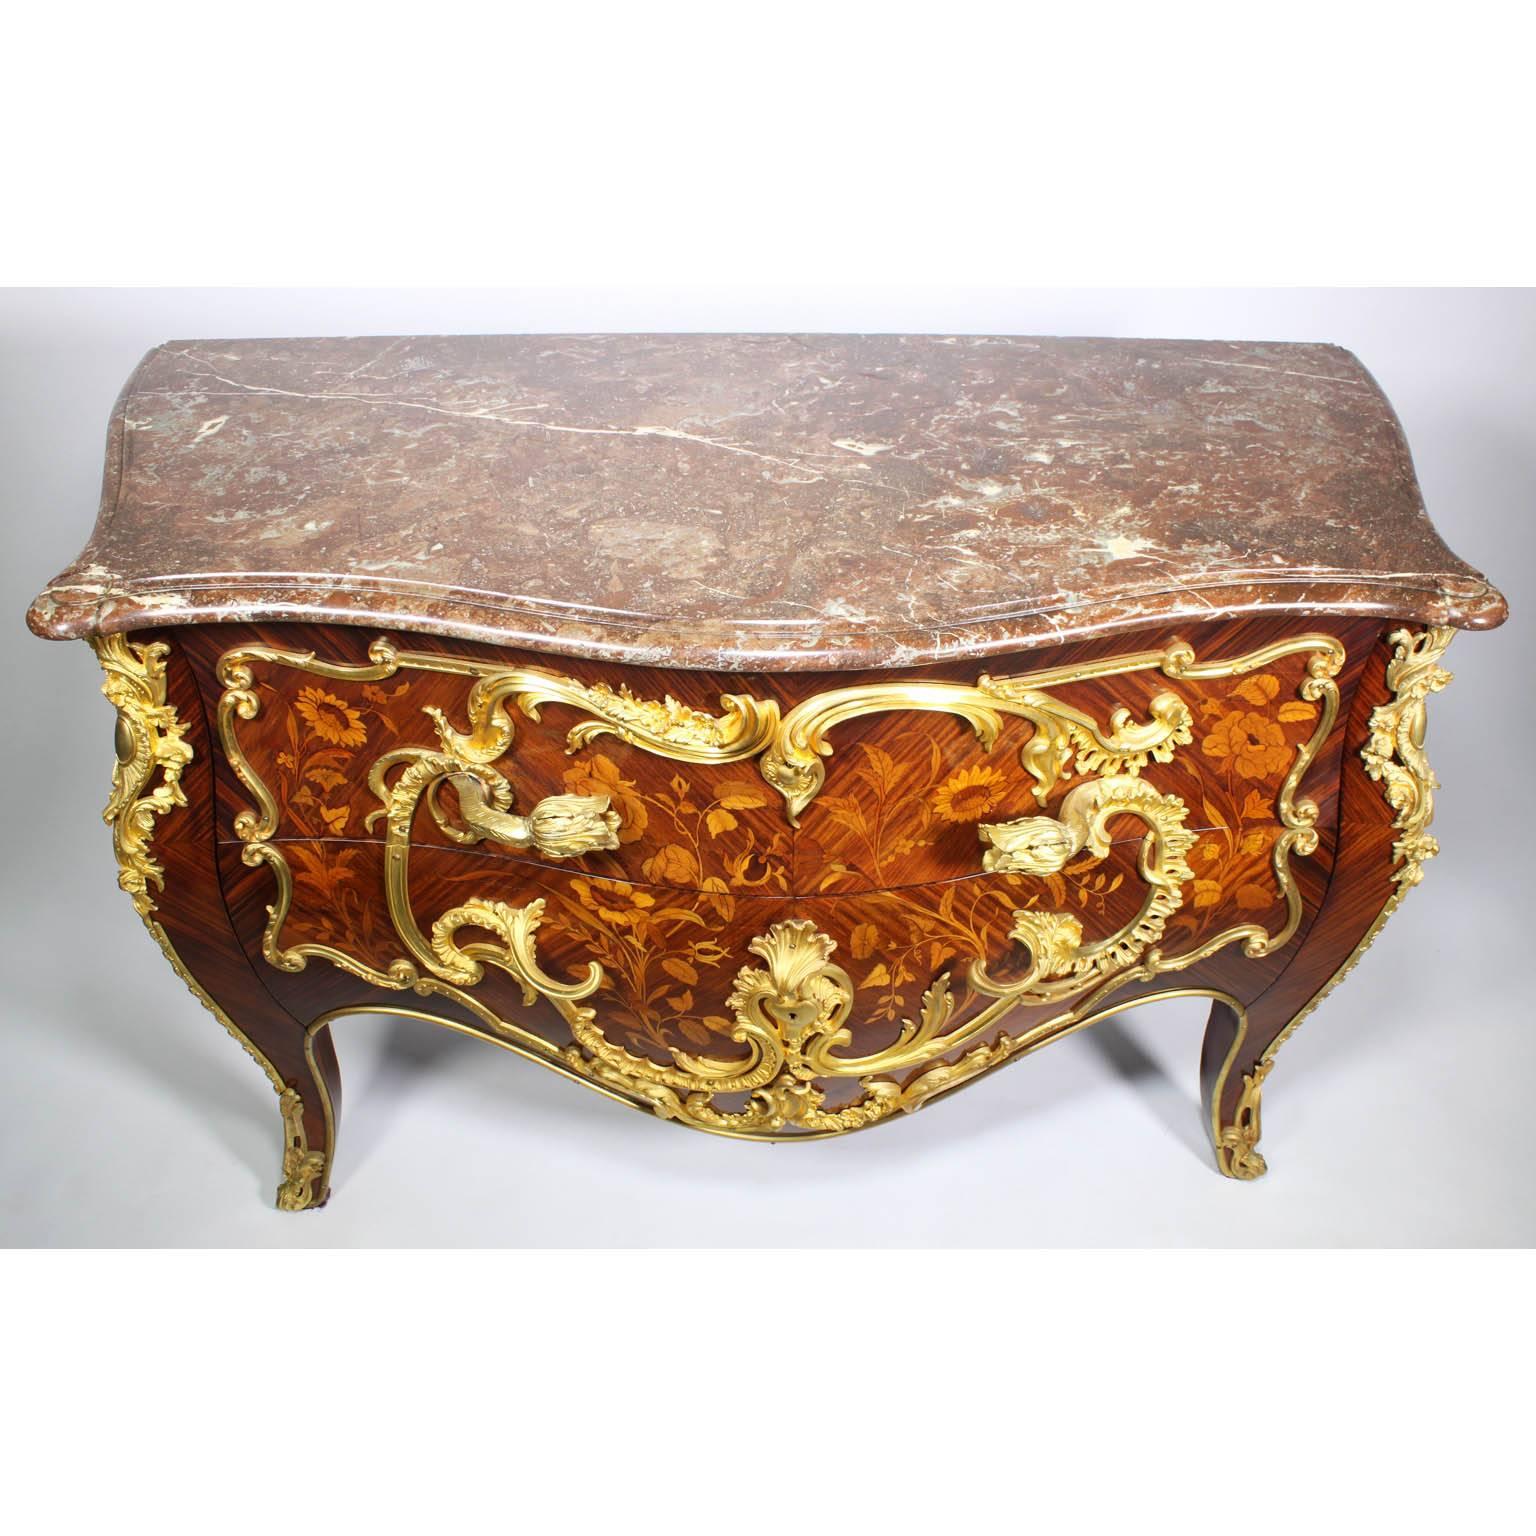 French, 19th Century, Louis XV Style Gilt Bronze-Mounted and Marquetry Commode For Sale 5